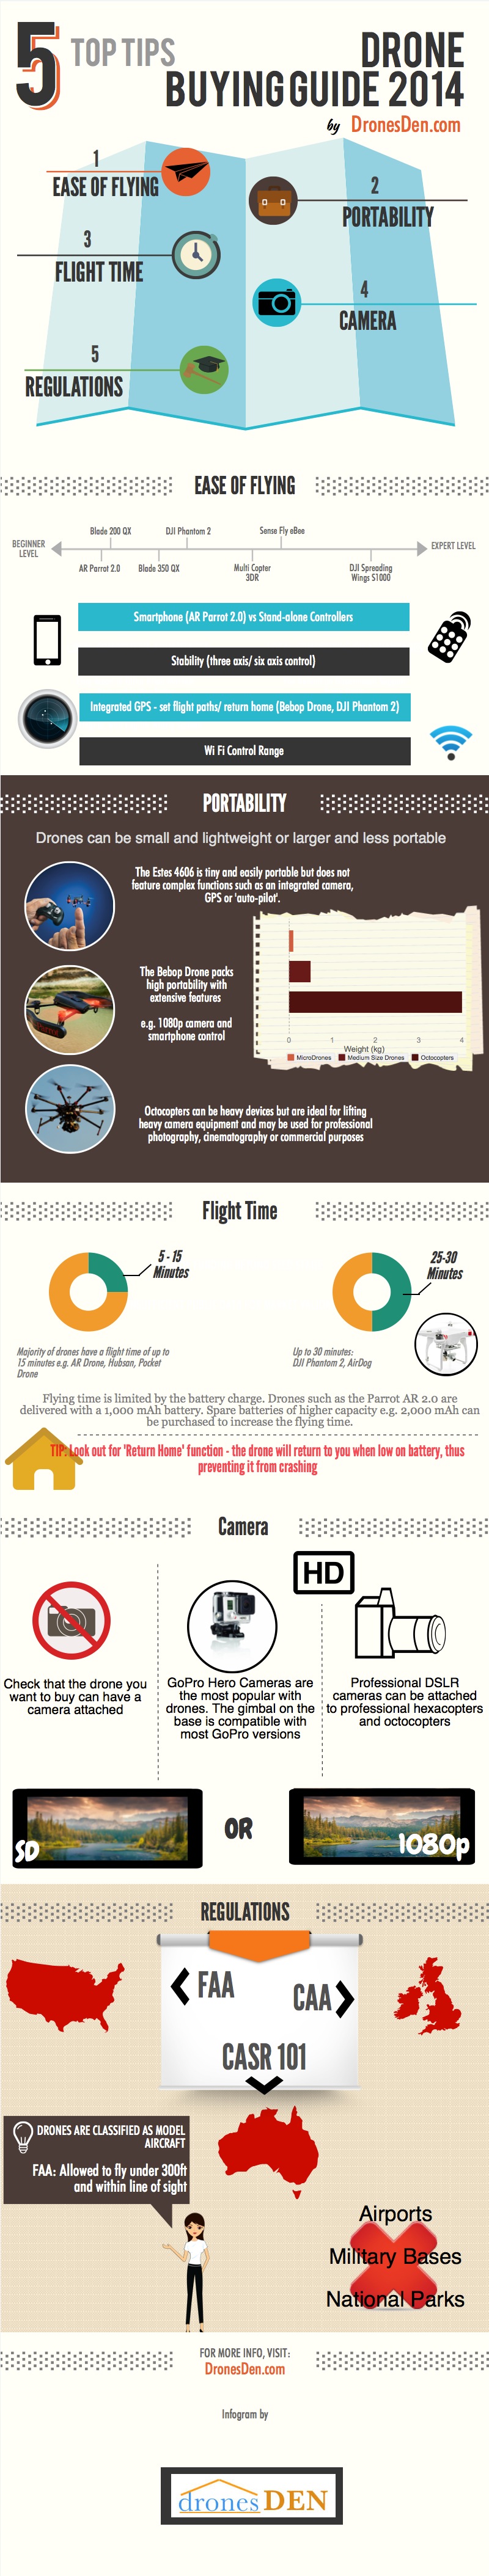 Visualizing Commercial Drones: 6 Helpful Infographics to Get You Up to Speed